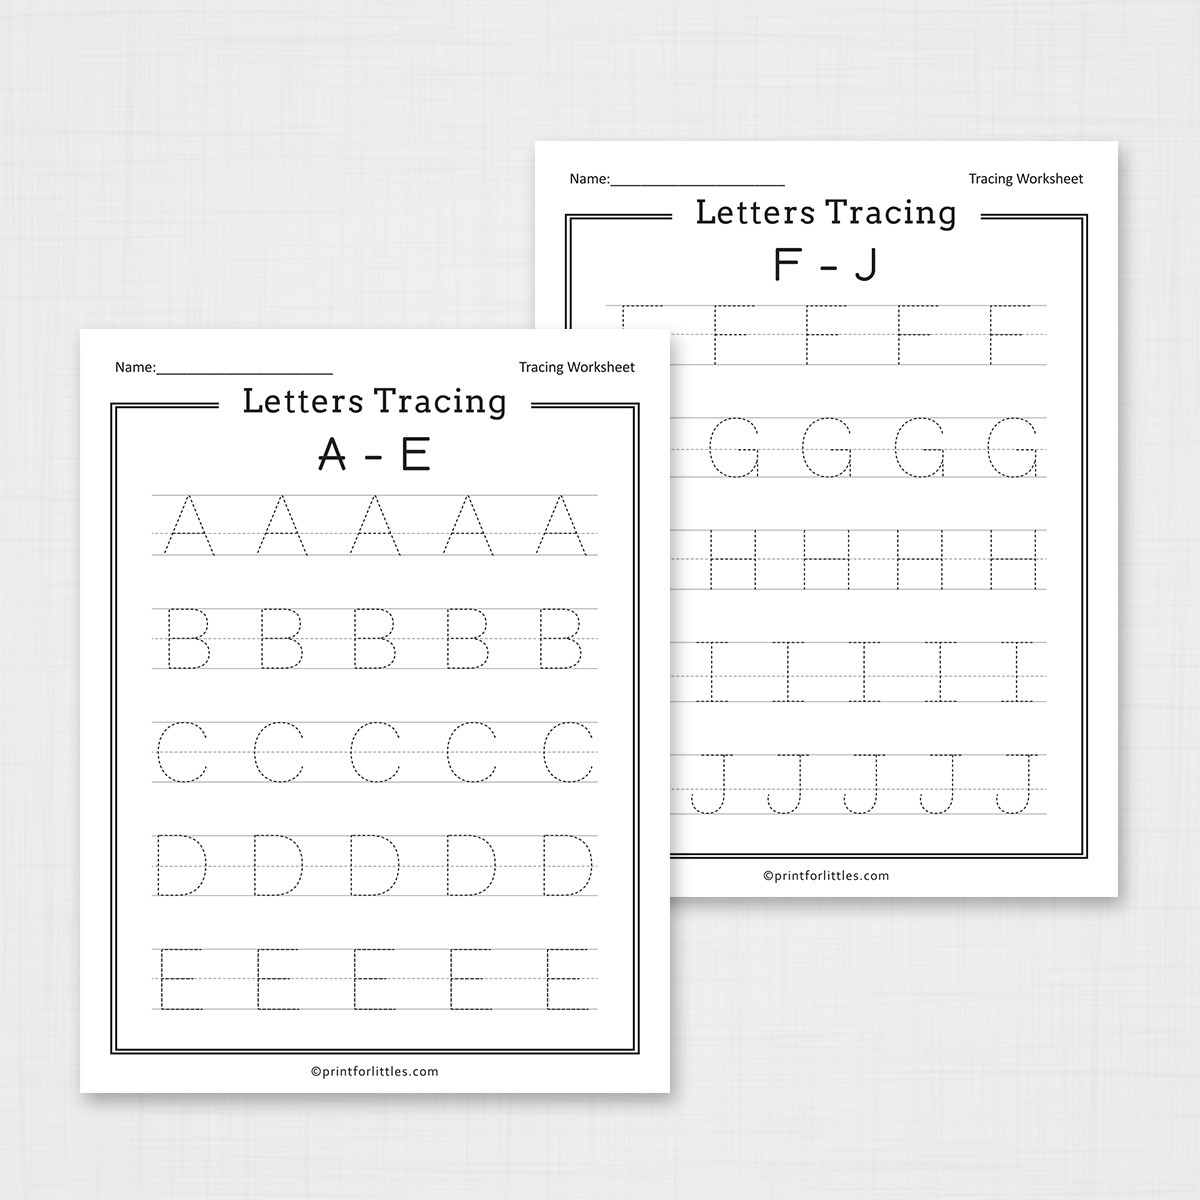 Letters Tracing A-Z Worksheets